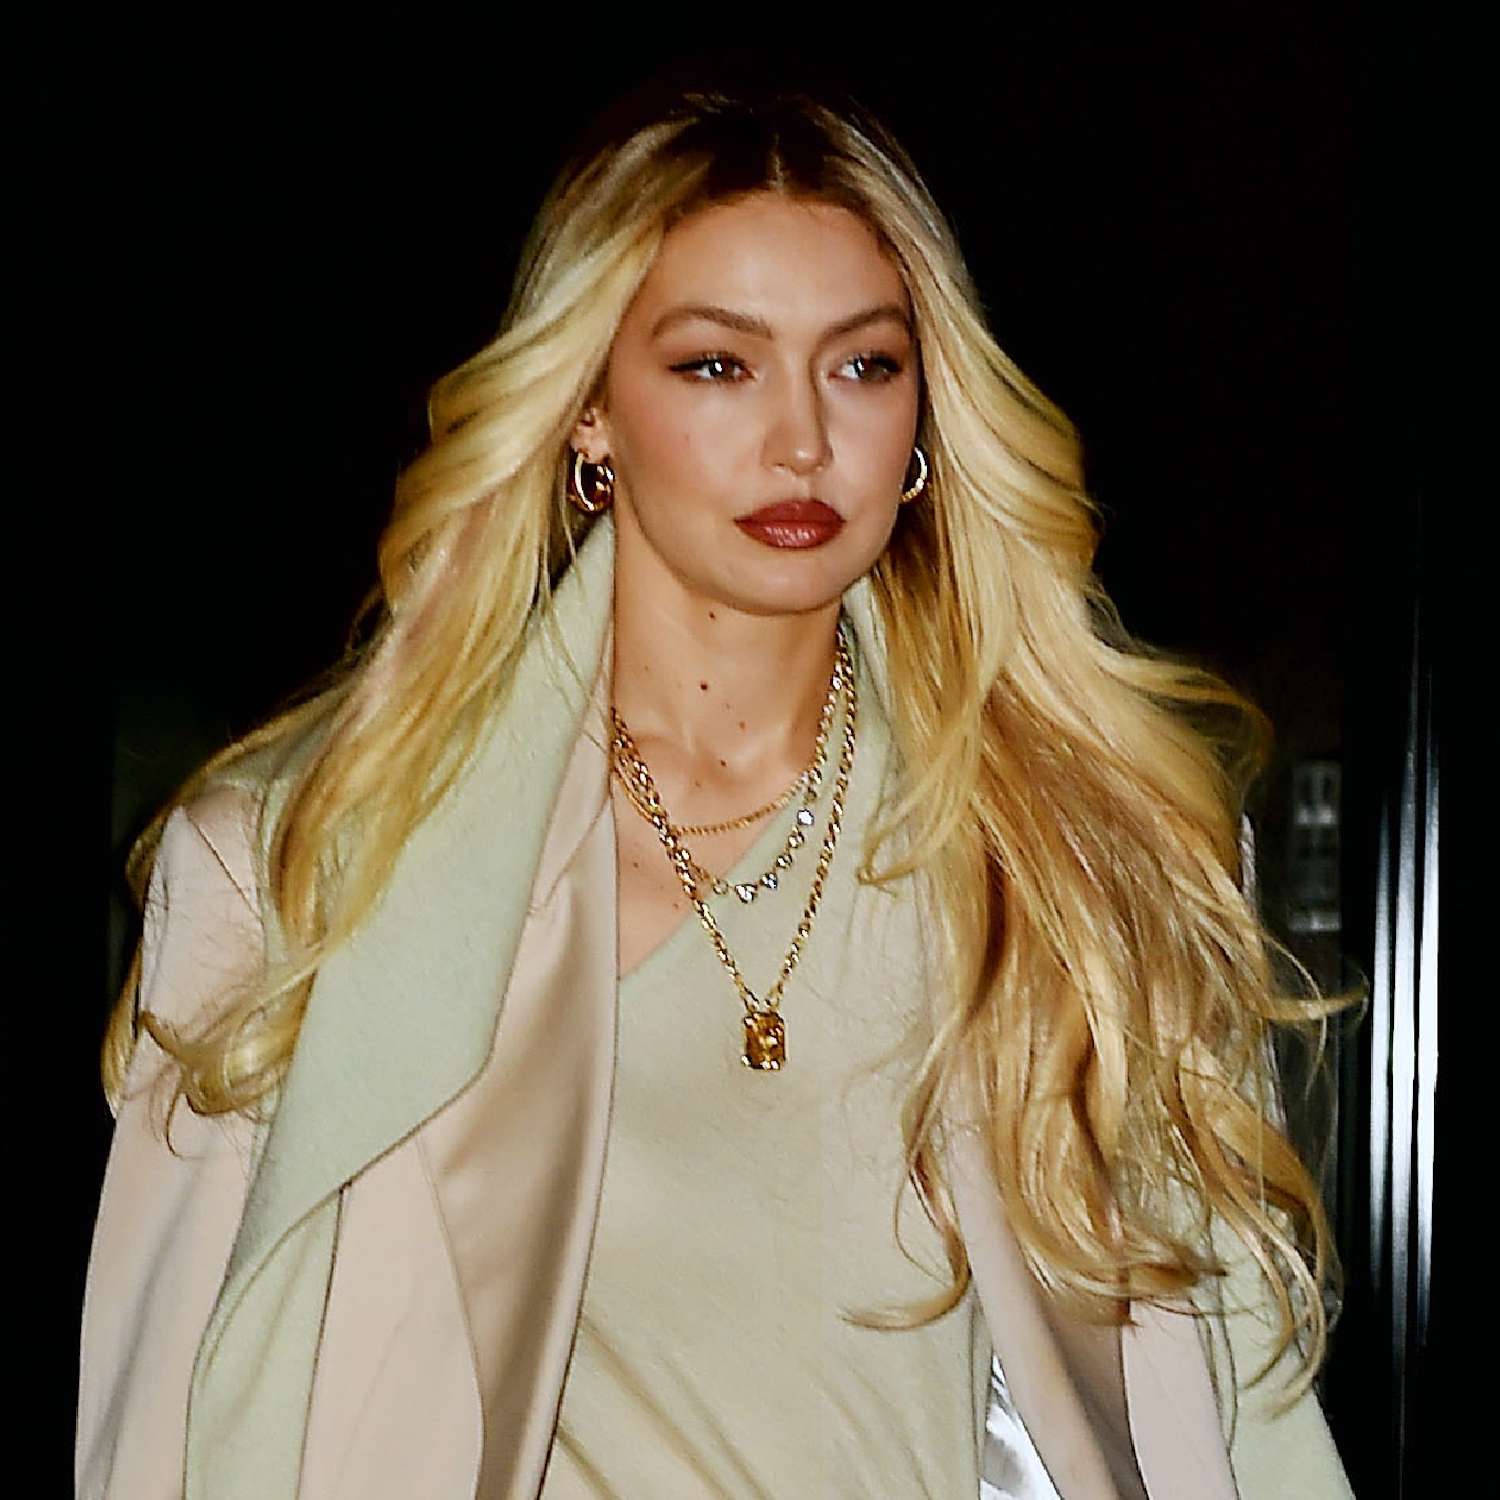 Gigi Hadid wears a long hairstyle with bouncy, curled layers